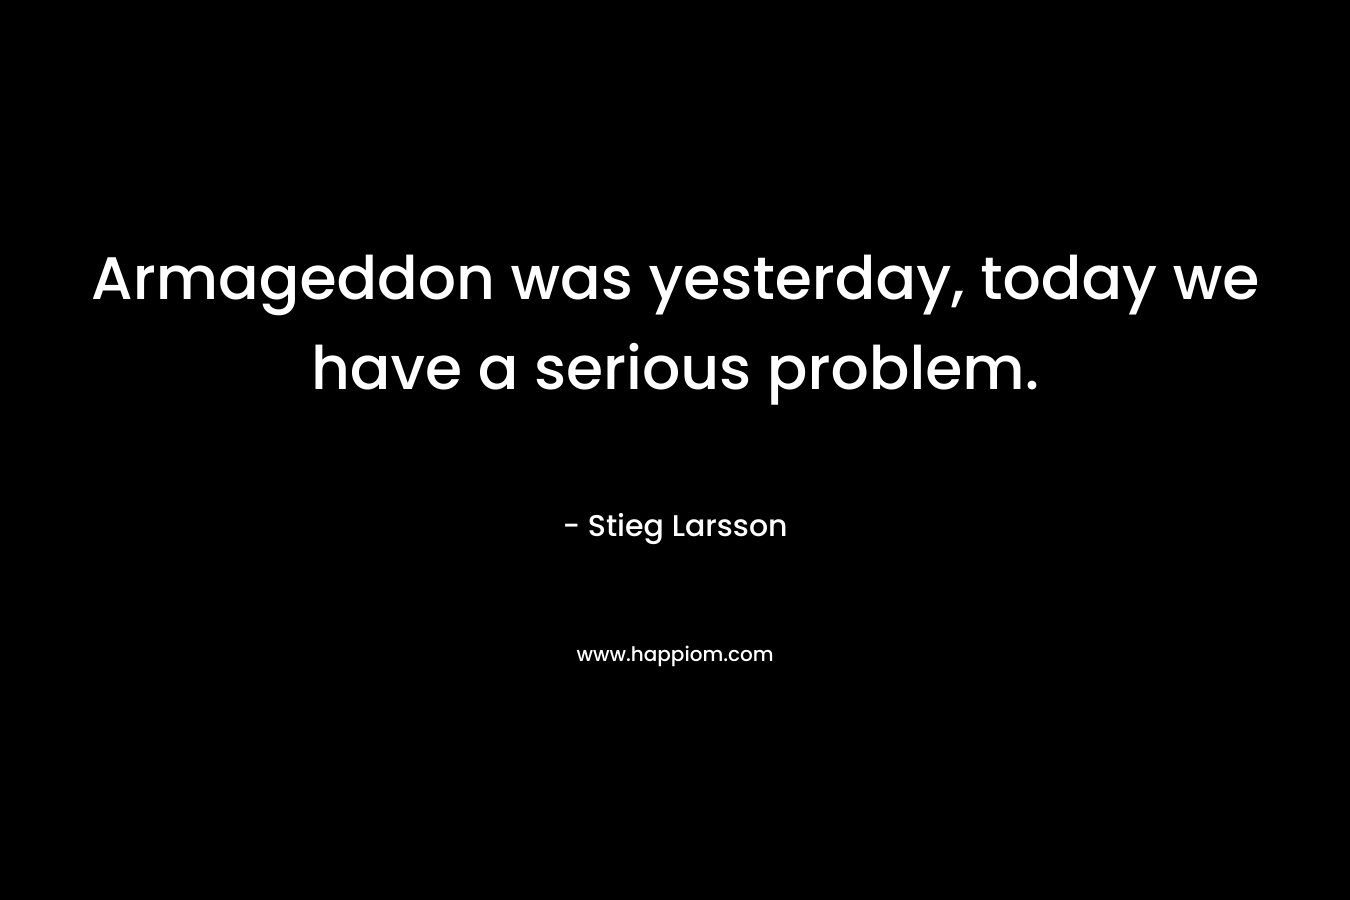 Armageddon was yesterday, today we have a serious problem. – Stieg Larsson